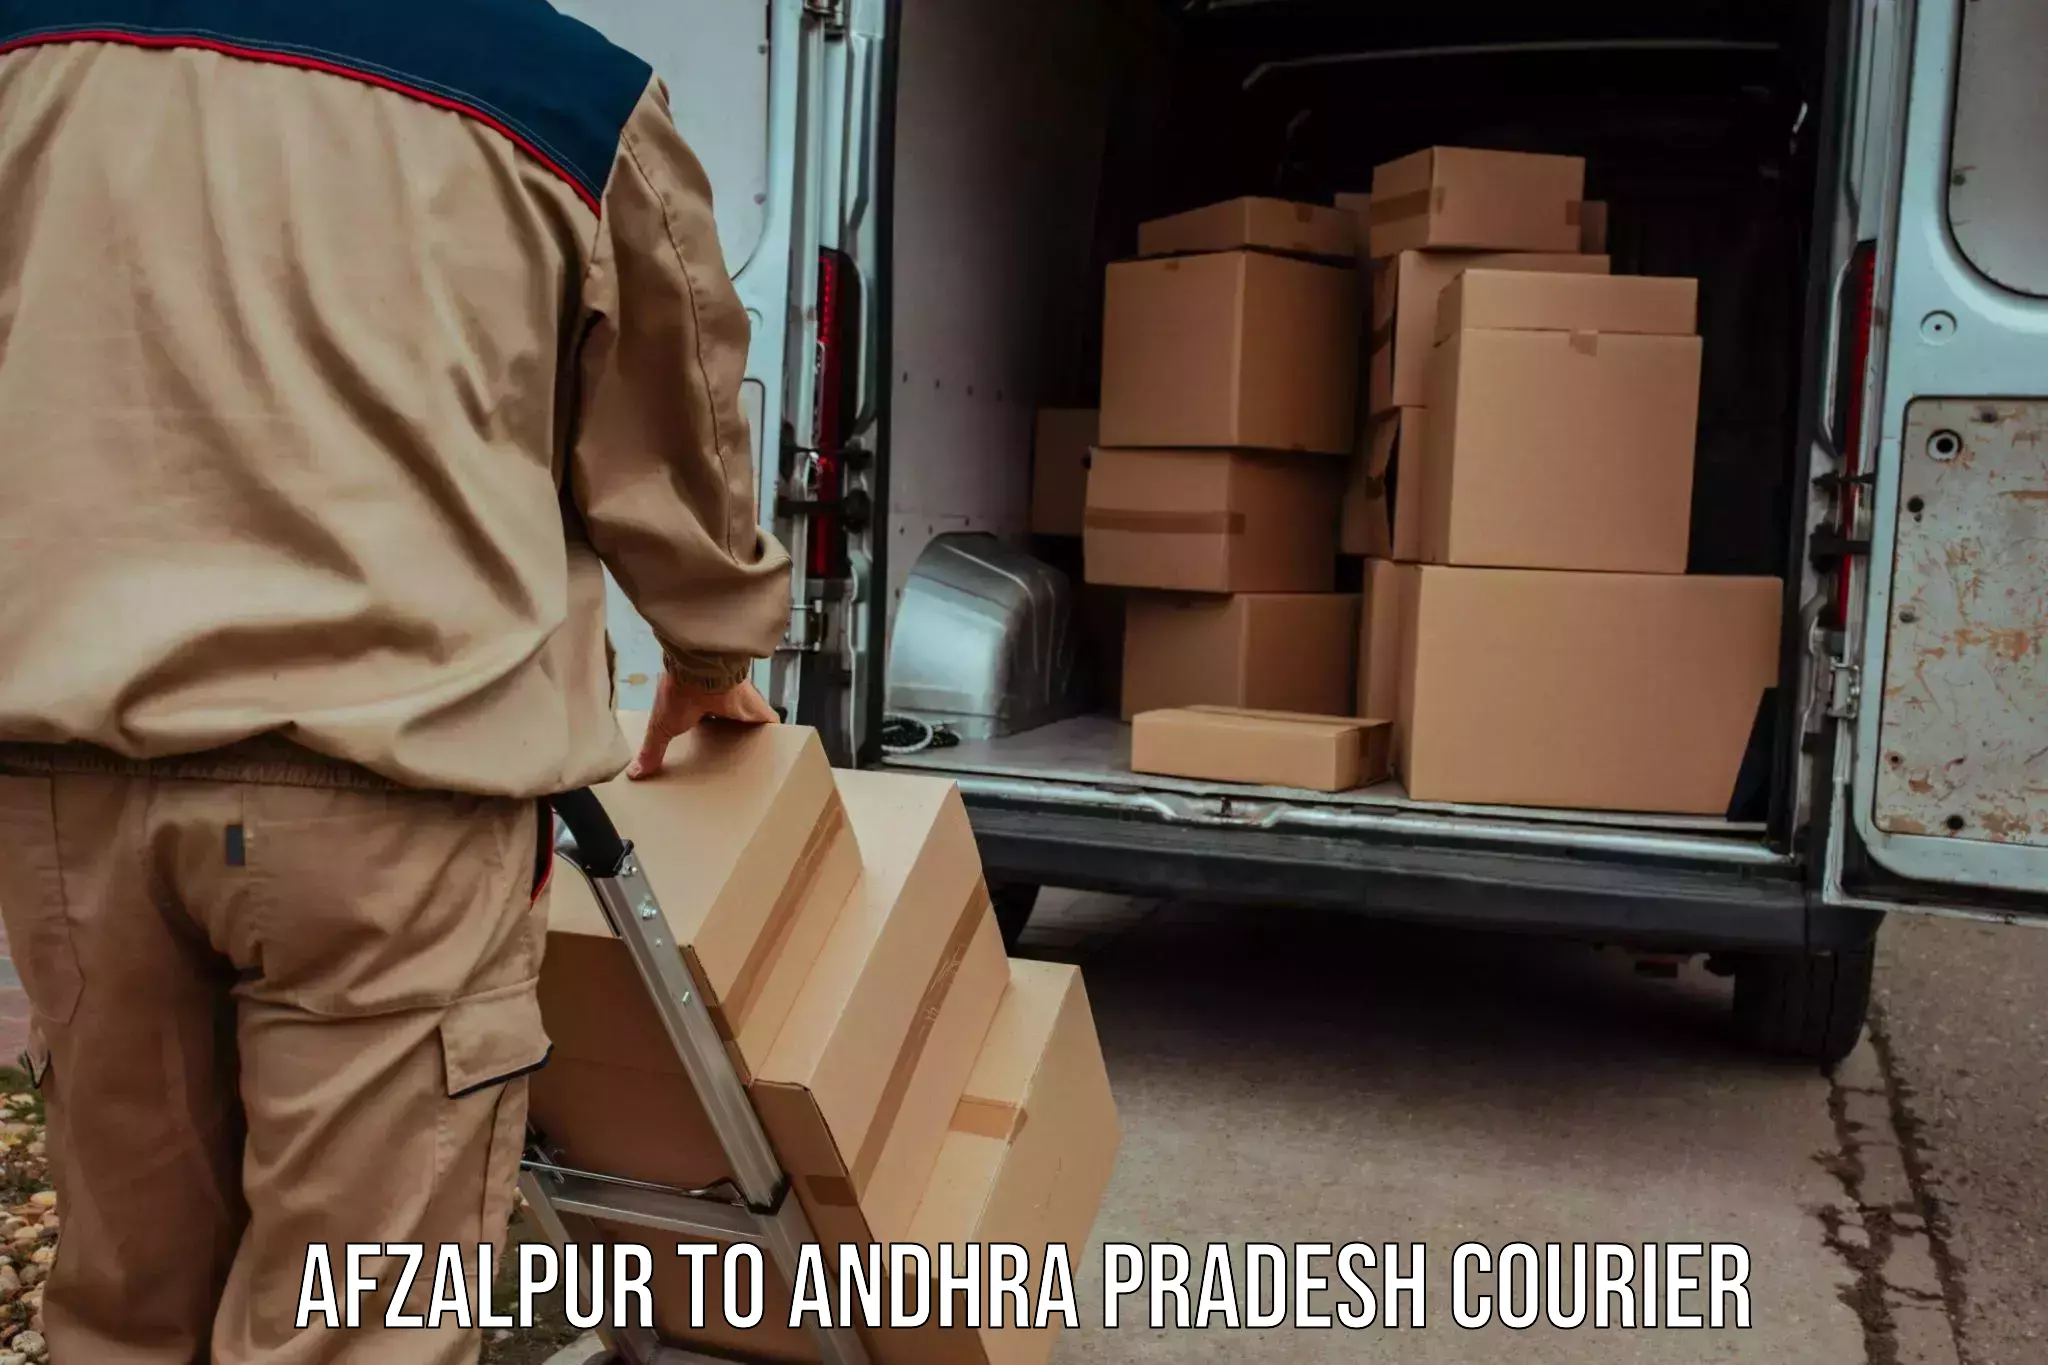 Sustainable delivery practices Afzalpur to Andhra Pradesh